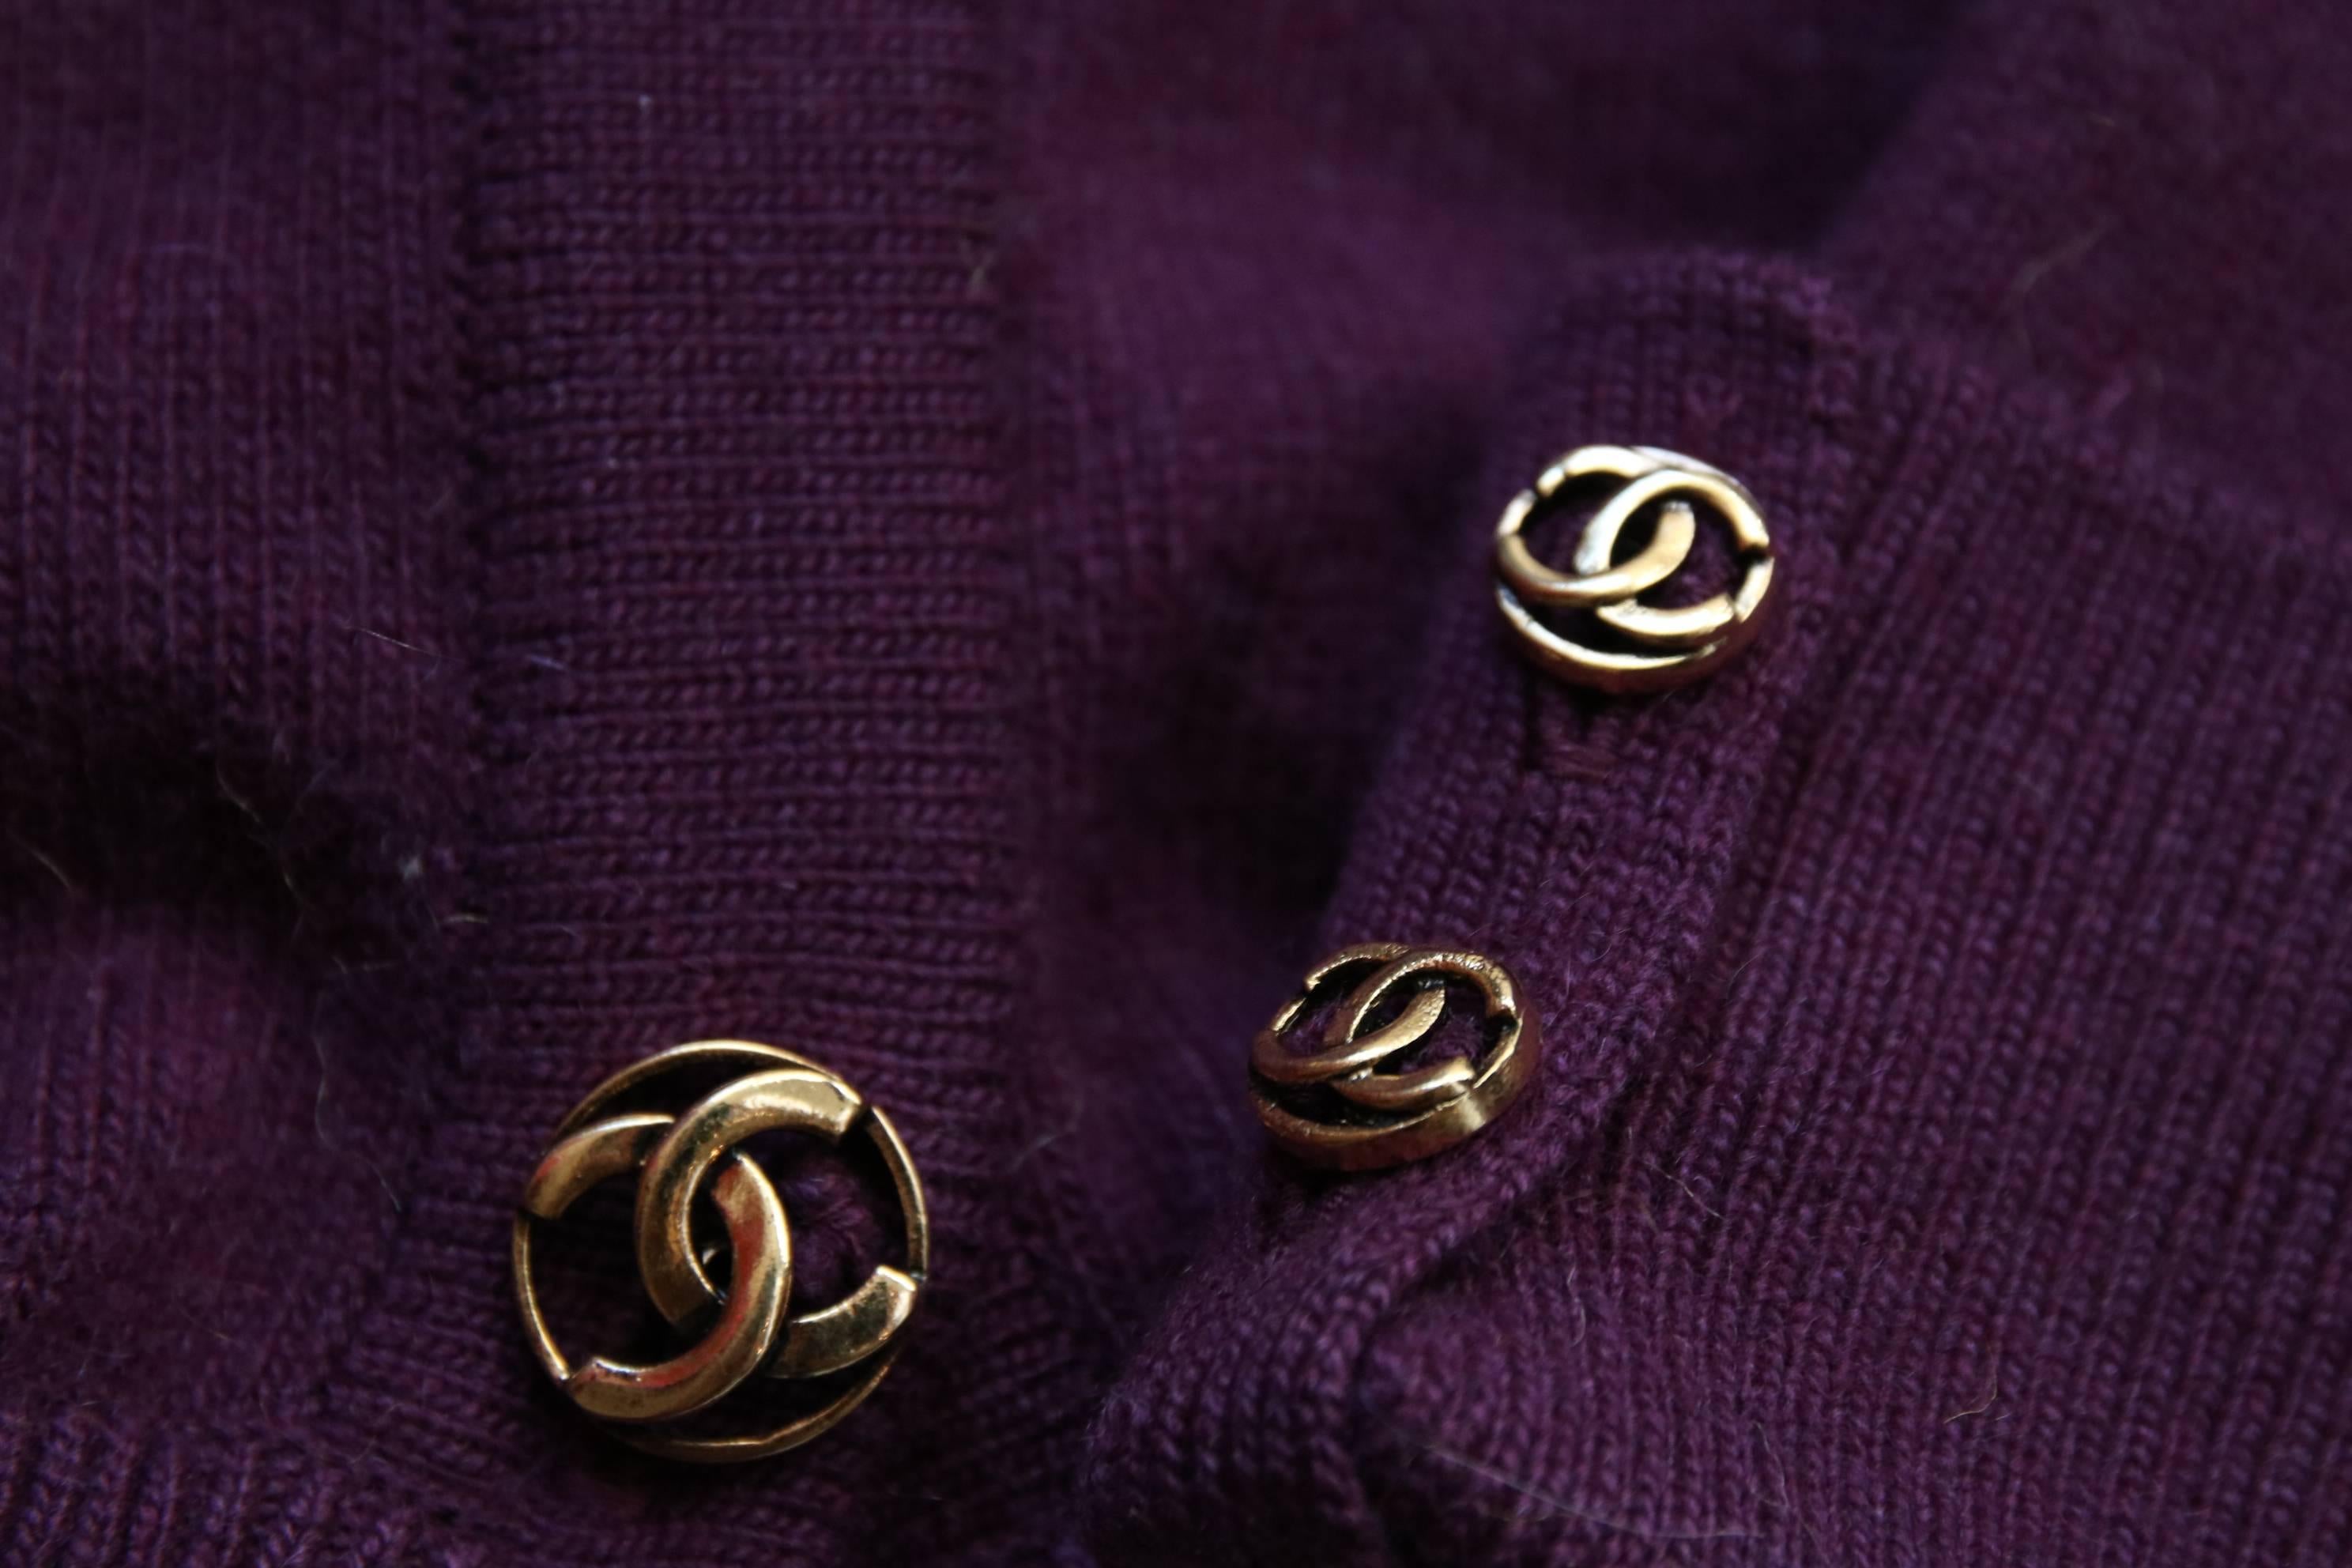 A vintage Chanel plum/purple 100% cashmere cardigan sweater featuring two in-built waist ties in a slightly cropped length. Features Chanel CC logo buttons down center front and sleeve cuffs. In excellent condition. Size tag: